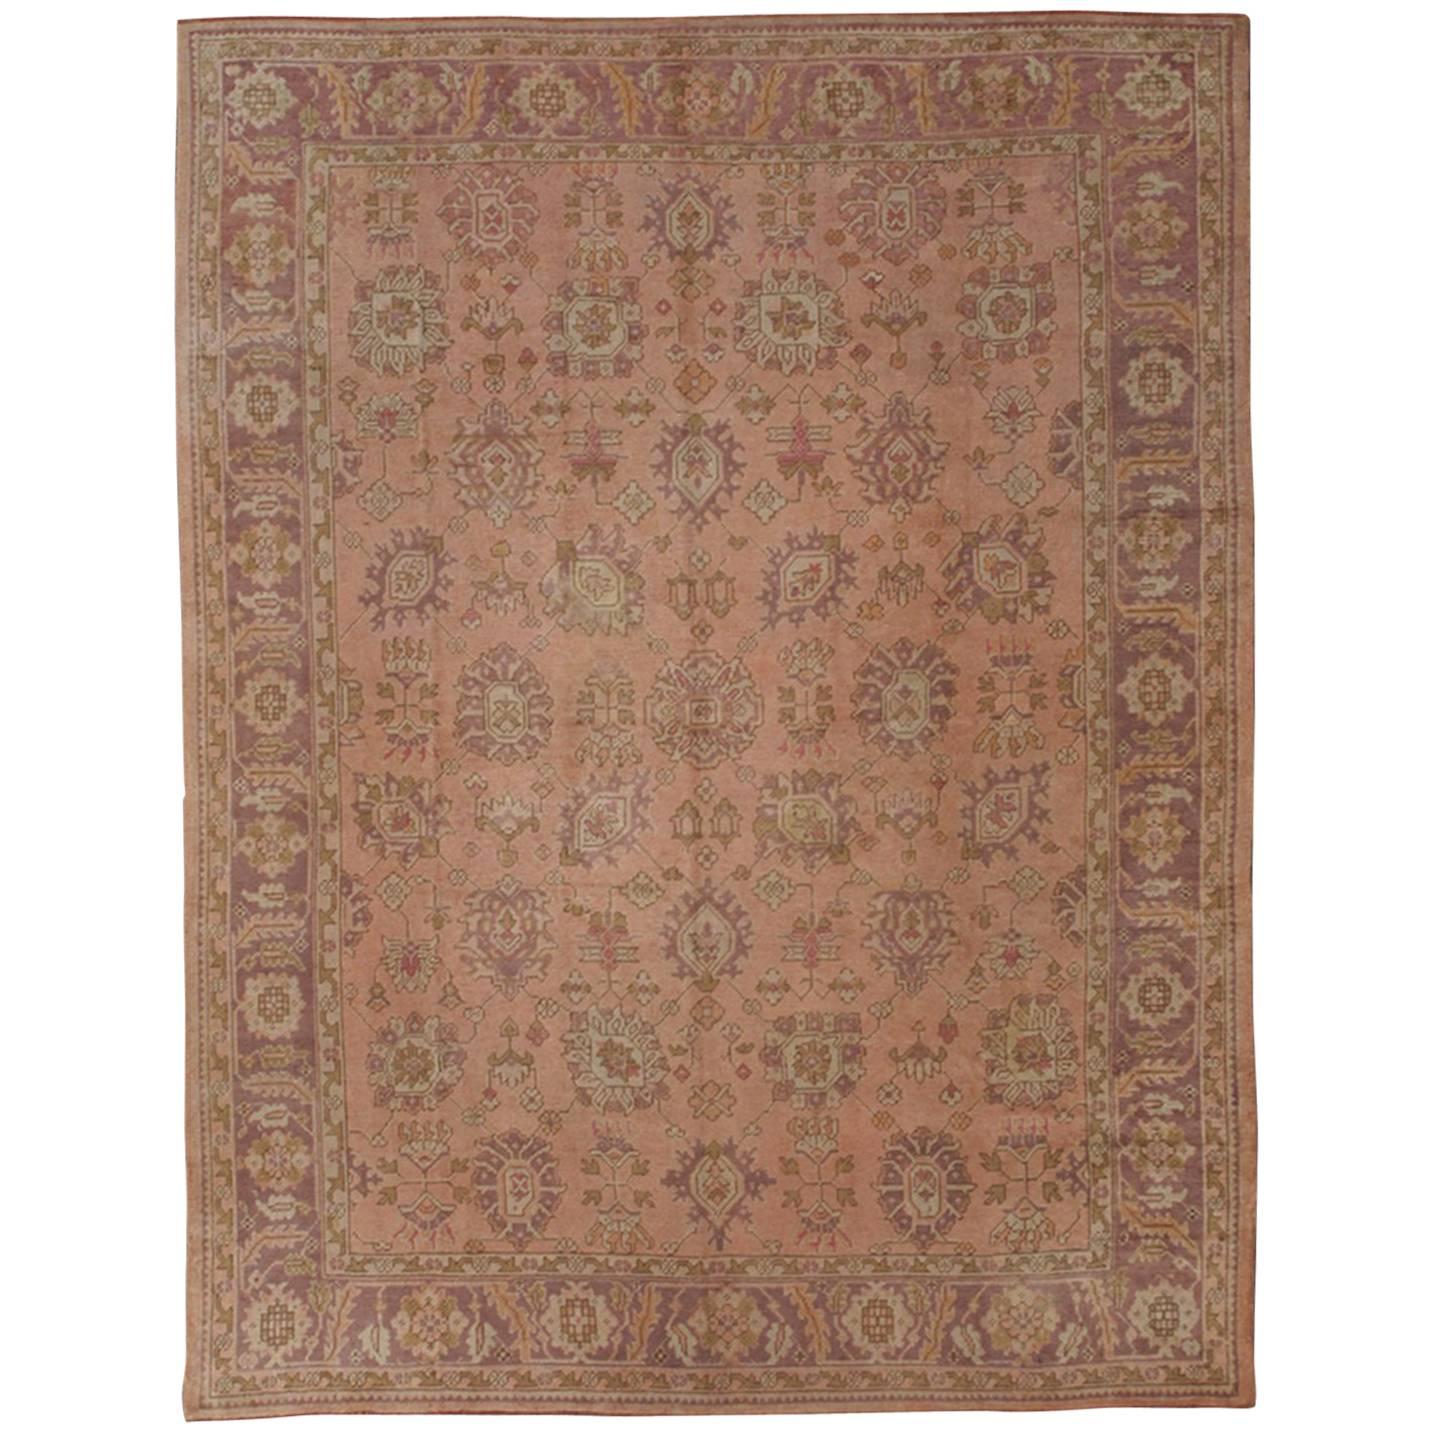 Antique Turkish Oushak Rug with Floral Motifs in Lavender, Coral-Pink, and Green For Sale